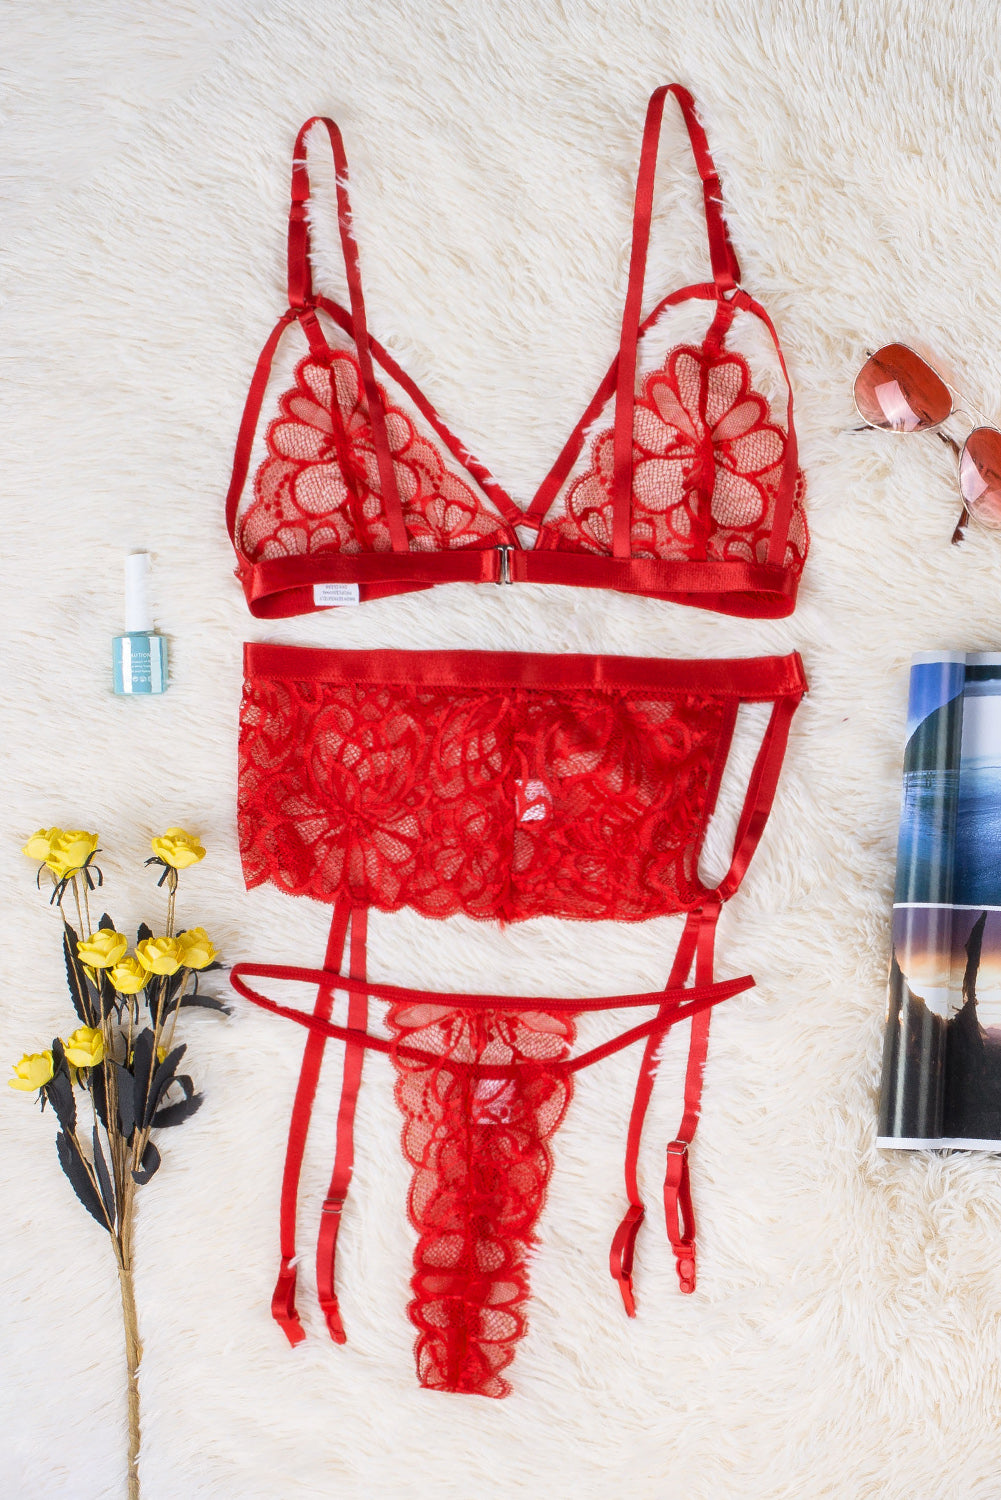 Red Lace Strappy 3pcs Lingerie Set with Garter Belt